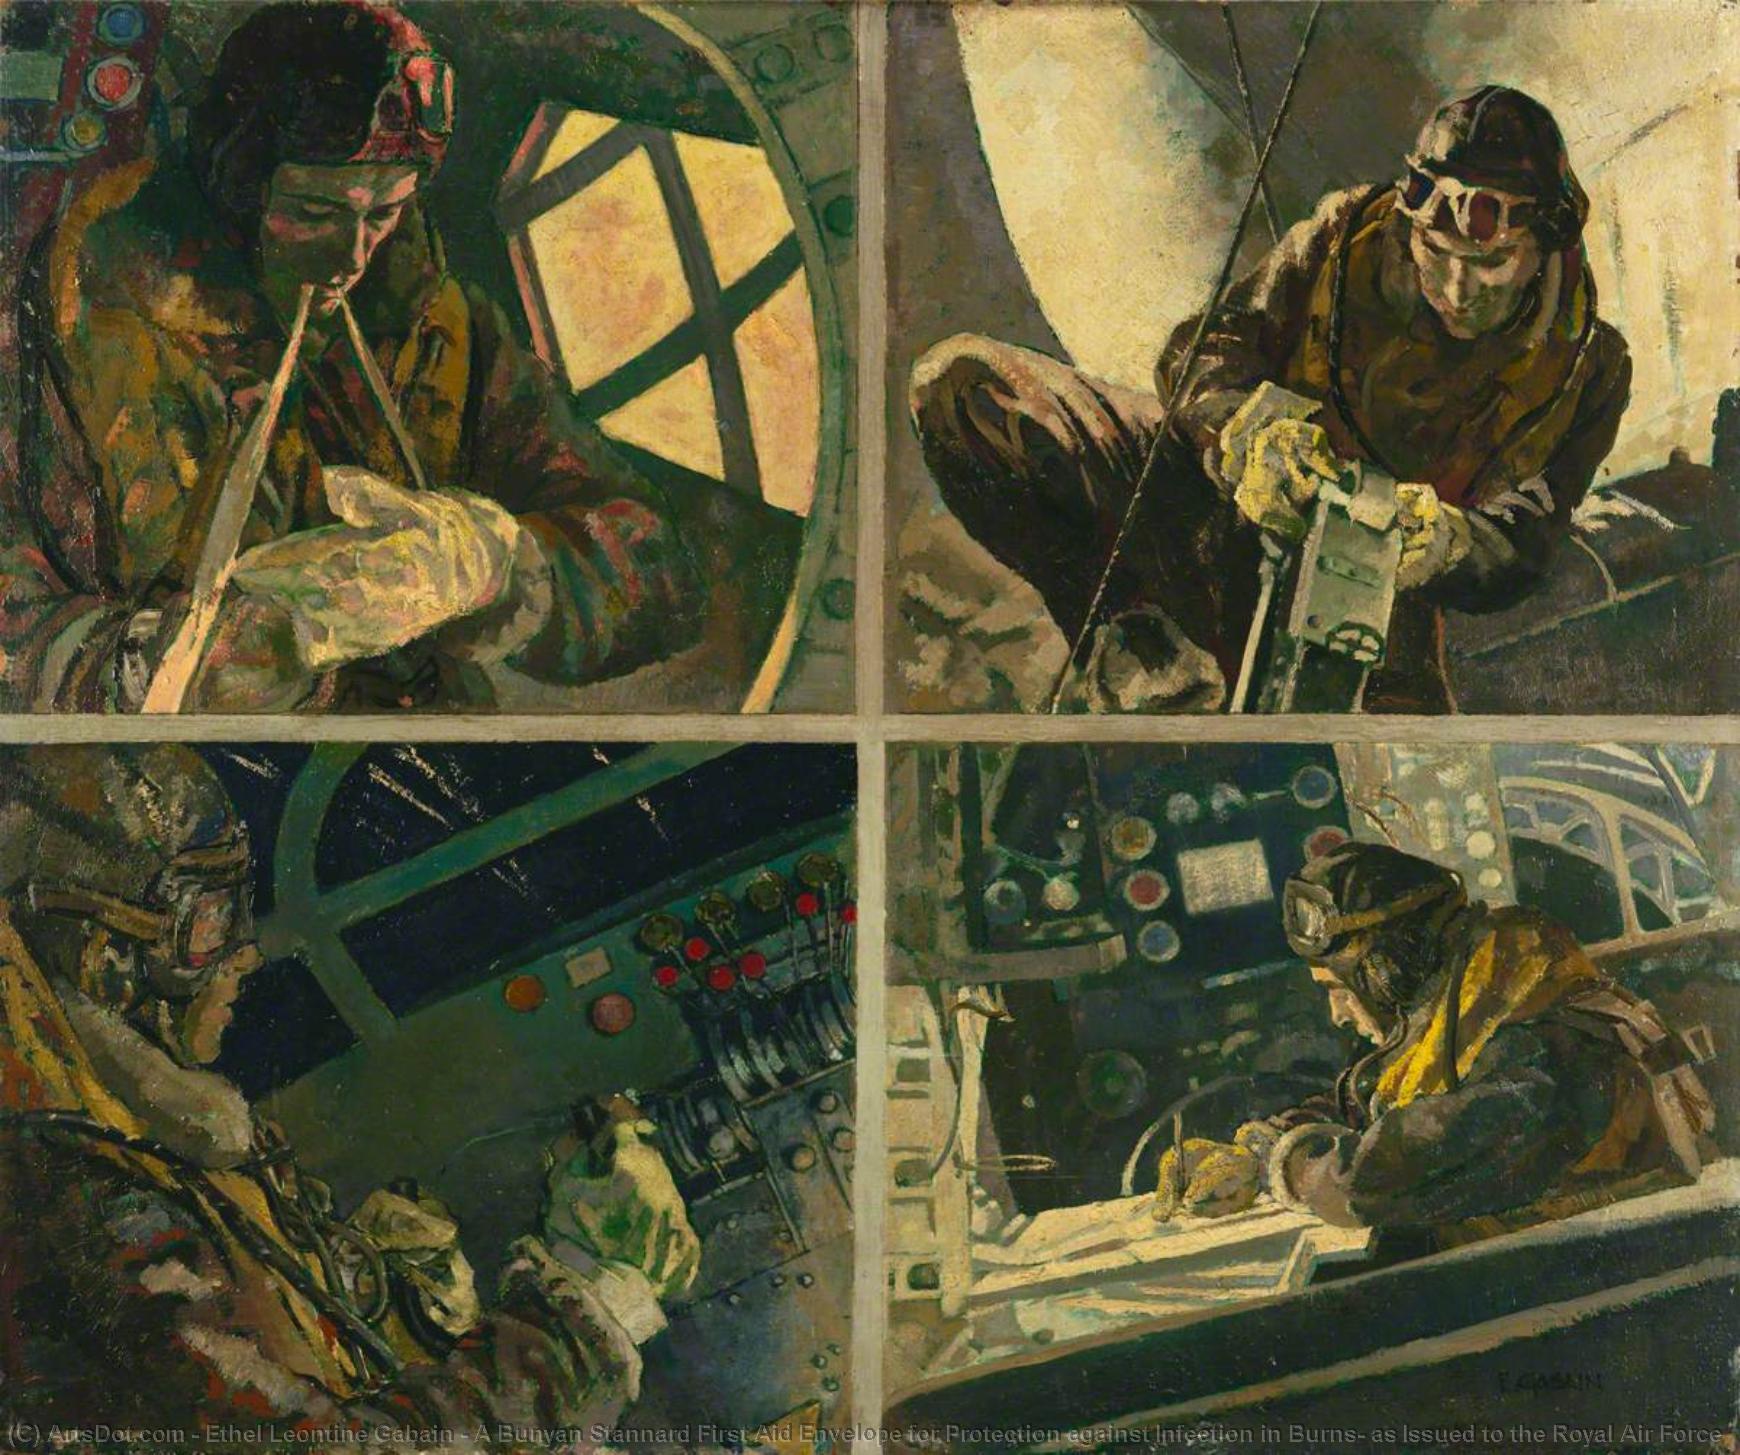 Wikioo.org - The Encyclopedia of Fine Arts - Painting, Artwork by Ethel Leontine Gabain - A Bunyan Stannard First Aid Envelope for Protection against Infection in Burns, as Issued to the Royal Air Force